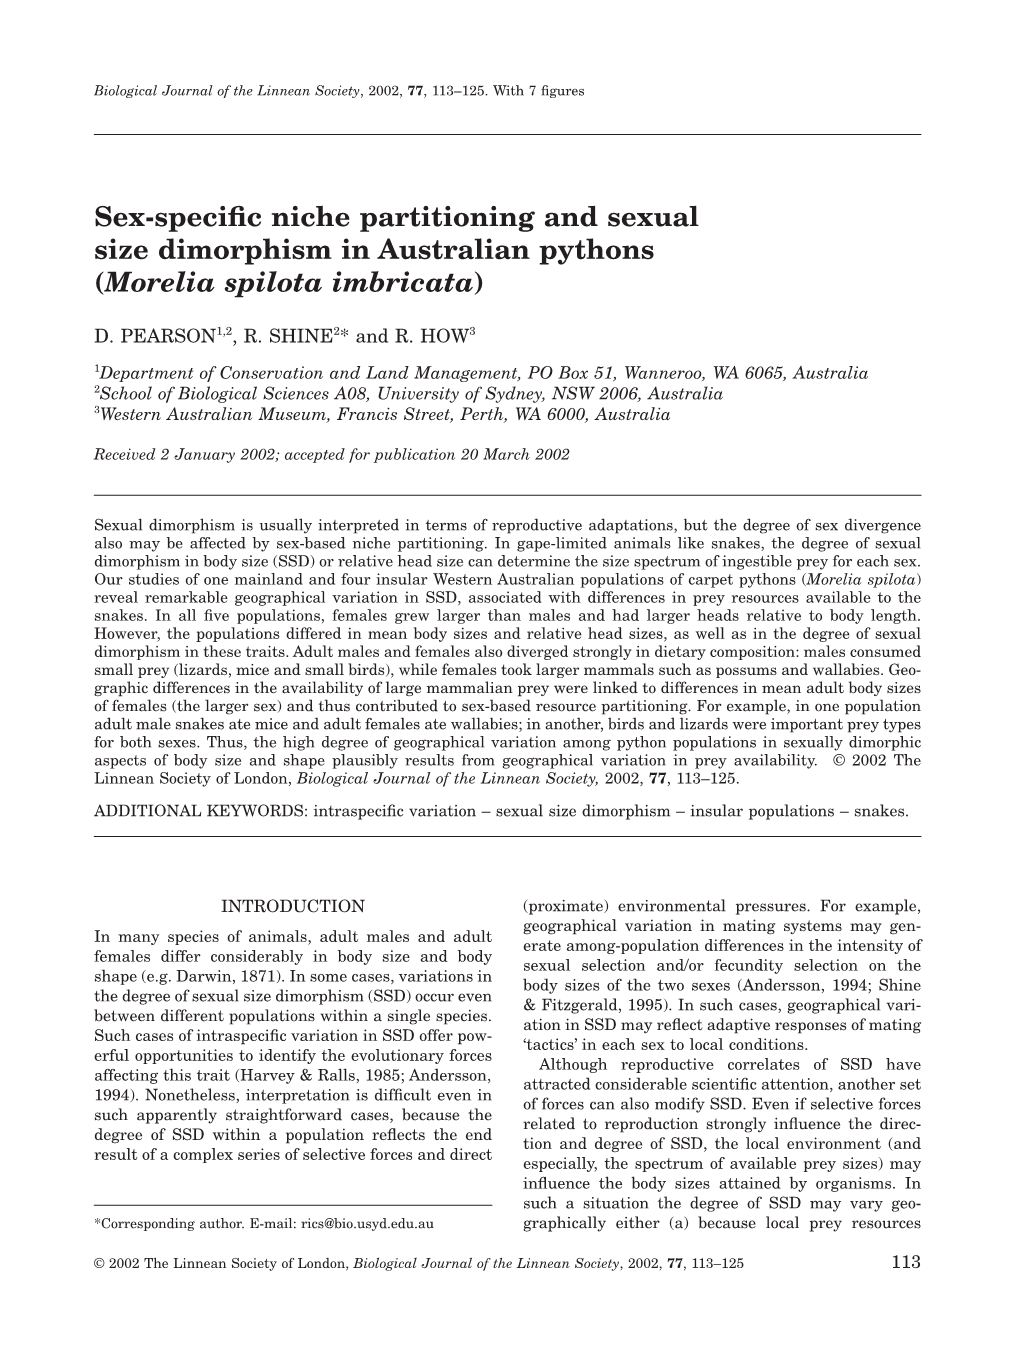 Sex-Specific Niche Partitioning and Sexual Size